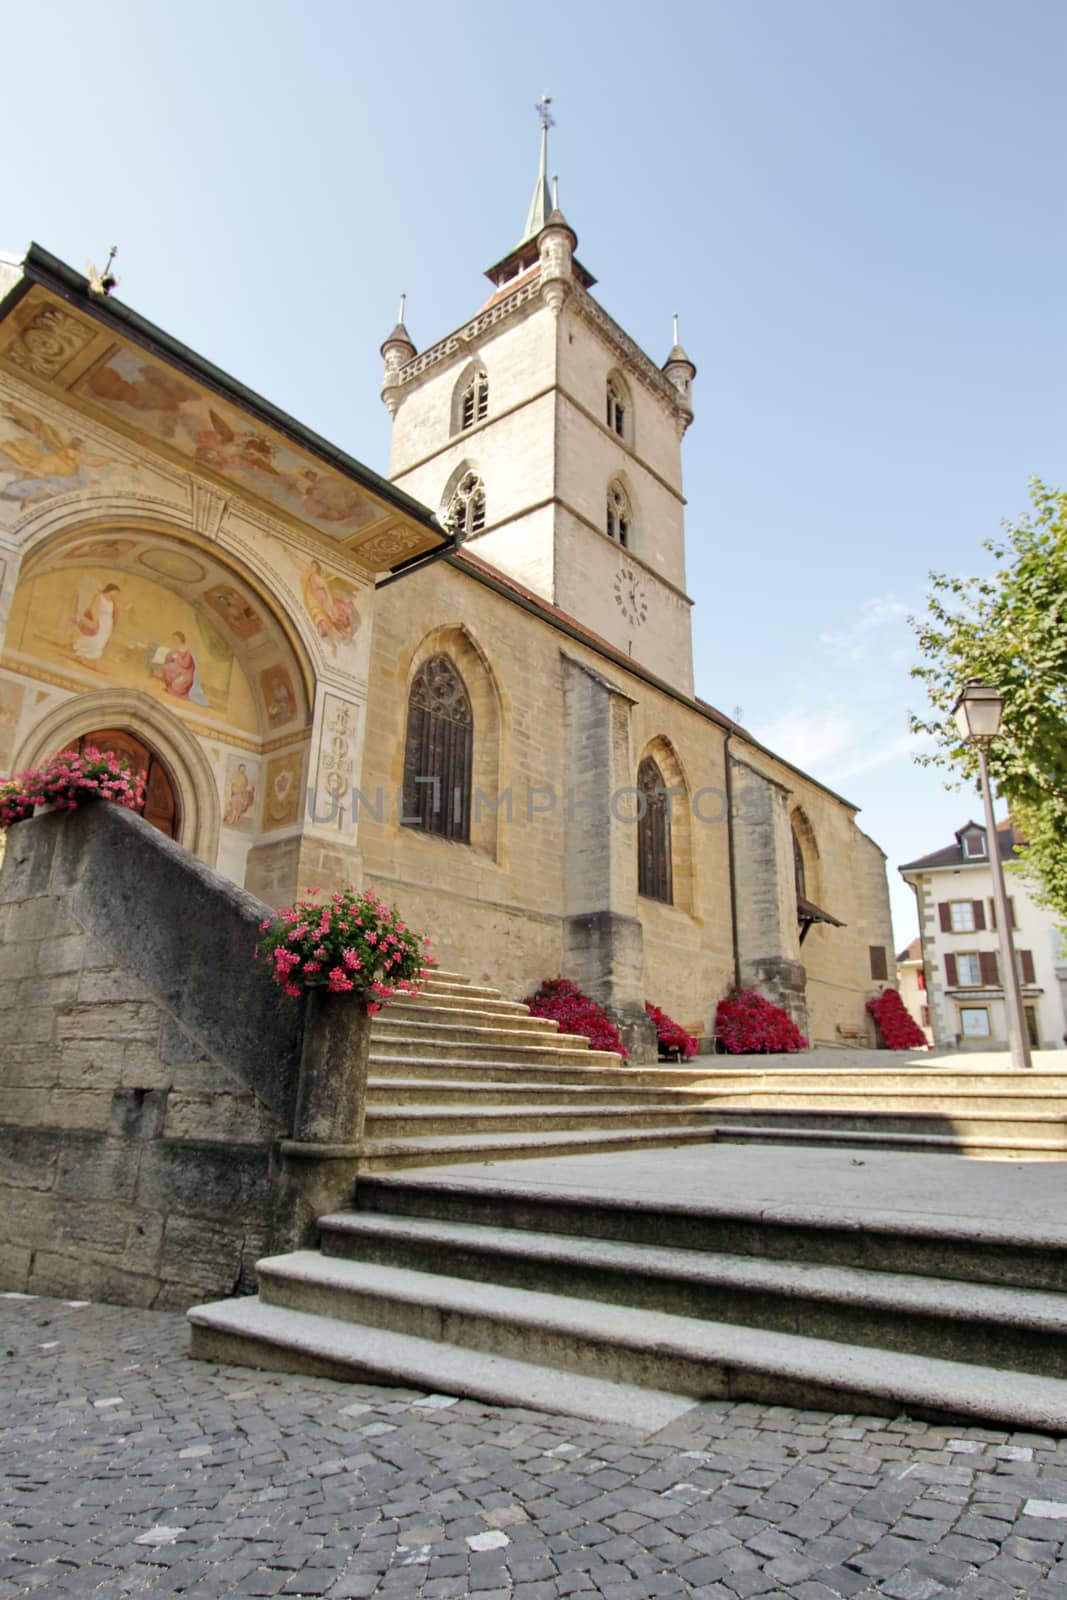 Frontview of catholic Church at Estavayer-le-Lac by, Fribourg canton, Switzerland.